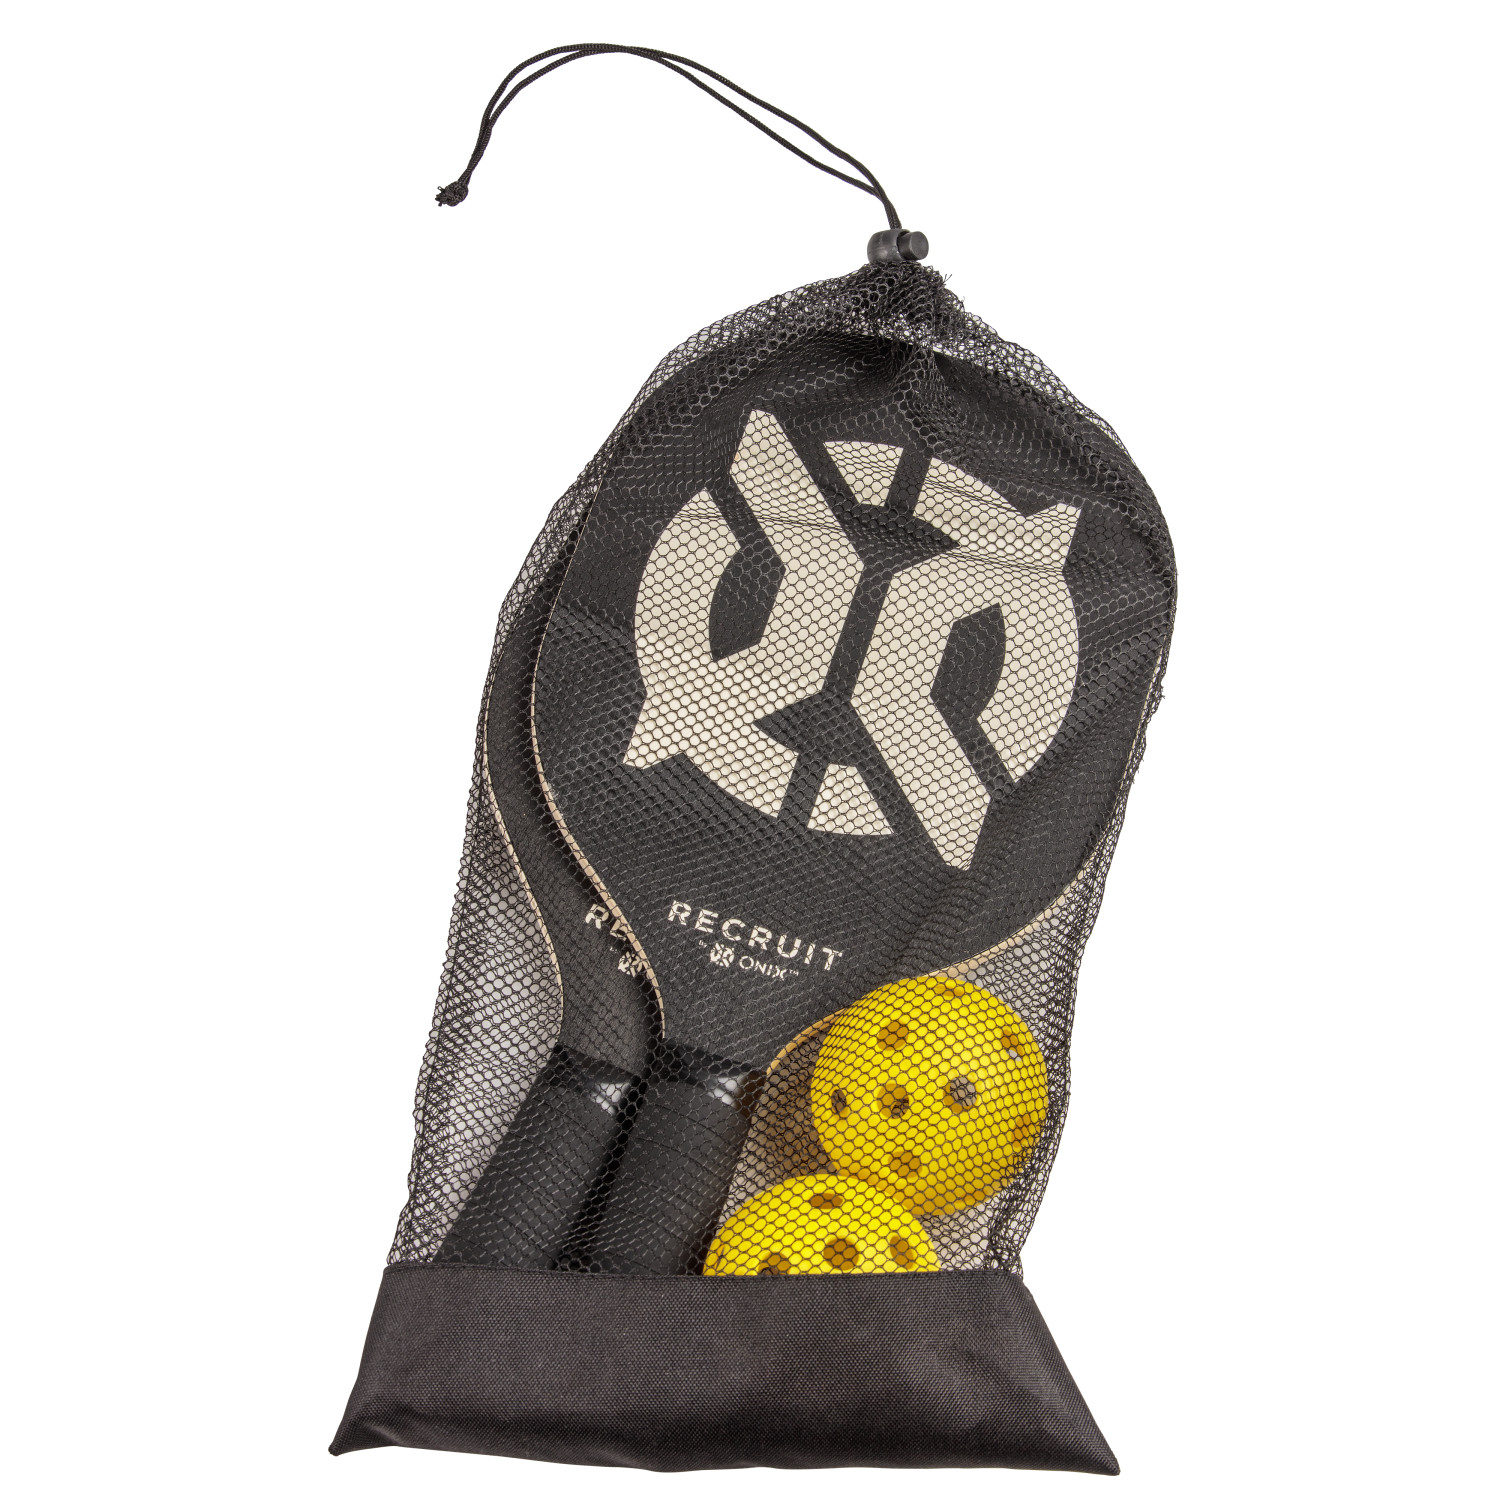 Recruit by ONIX Pickleball Starter Set for All Ages and Levels to Learn to Play - image 5 of 11